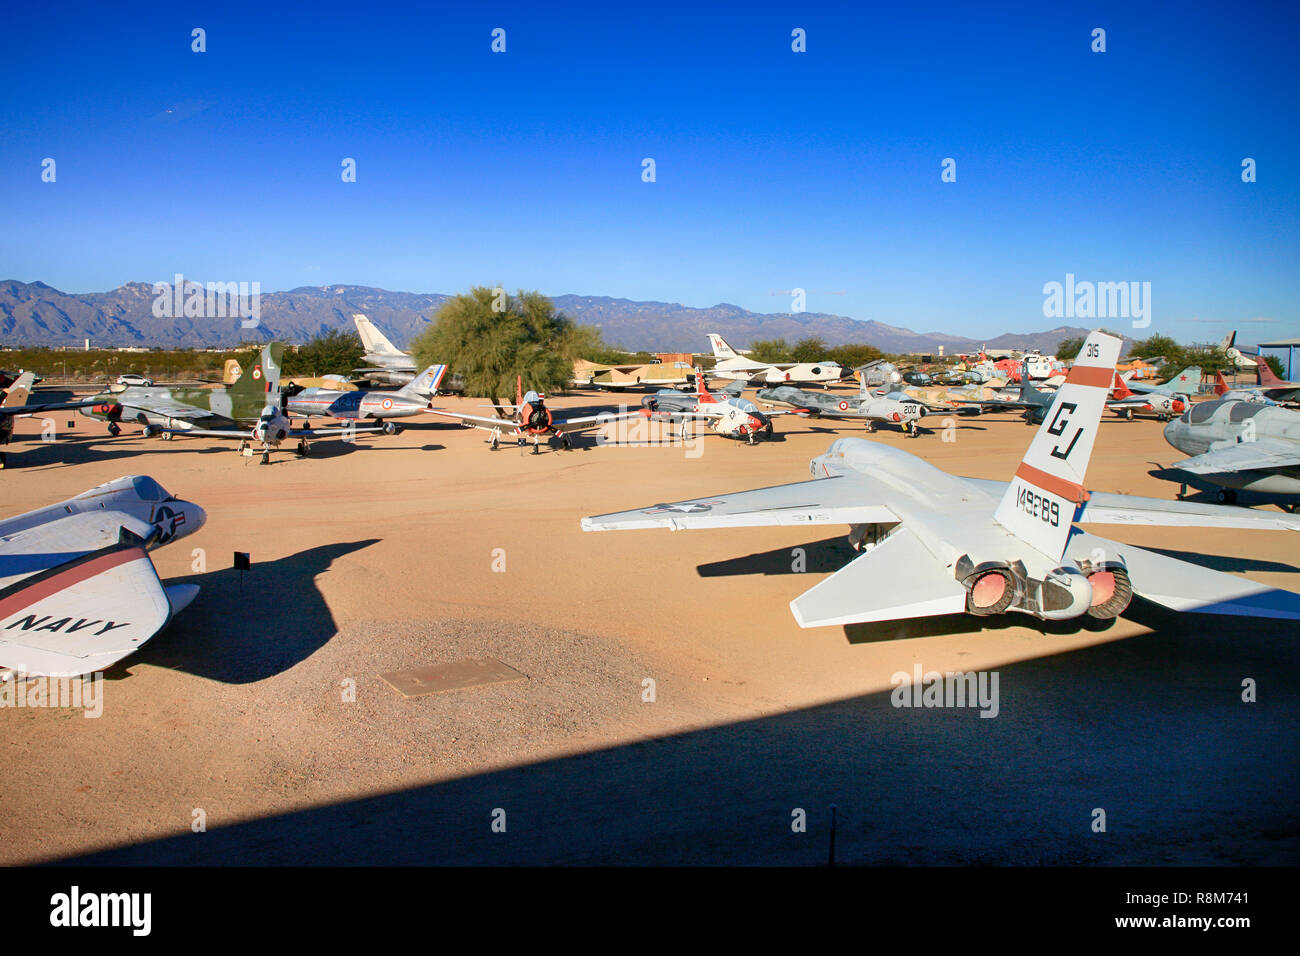 View of some of the aircraft on display at the Pima Air & Space Museum in Tucson, AZ Stock Photo